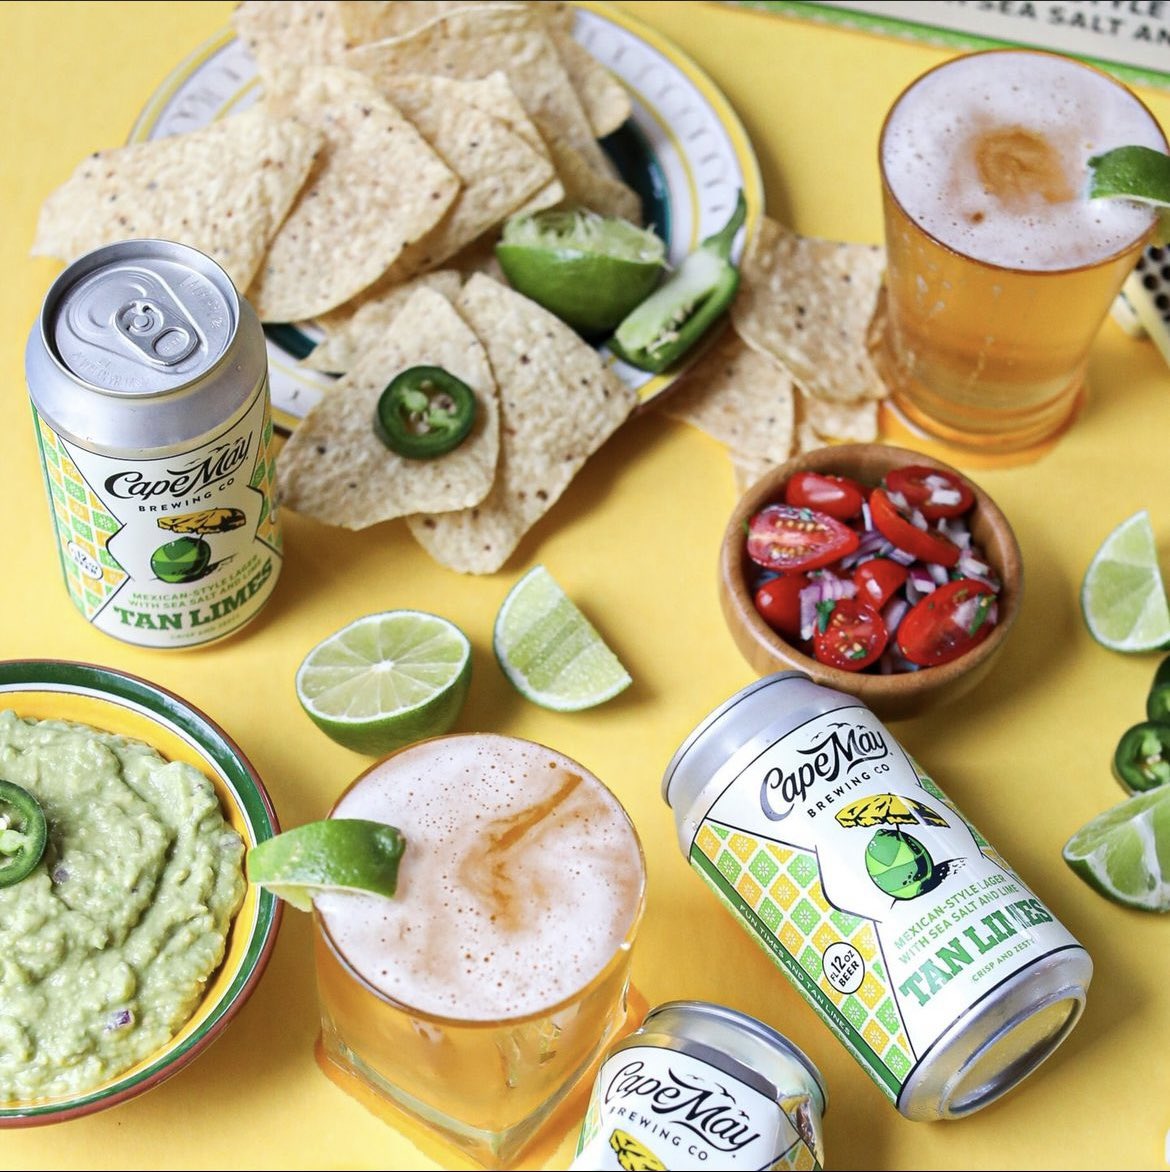 Looking for a local option to pair with your #cincodemayoweekend ? Pick up some Cape May Tan Limes Mexican-Style Lager here: shorepoint.com/beer-finder/?f…

#cinco #CountdownToCinco #cincodemayo #beer #beerlover #craftbeer #craftbrewery #njcraftbeer #njbeer #njbusiness #jerseyshore